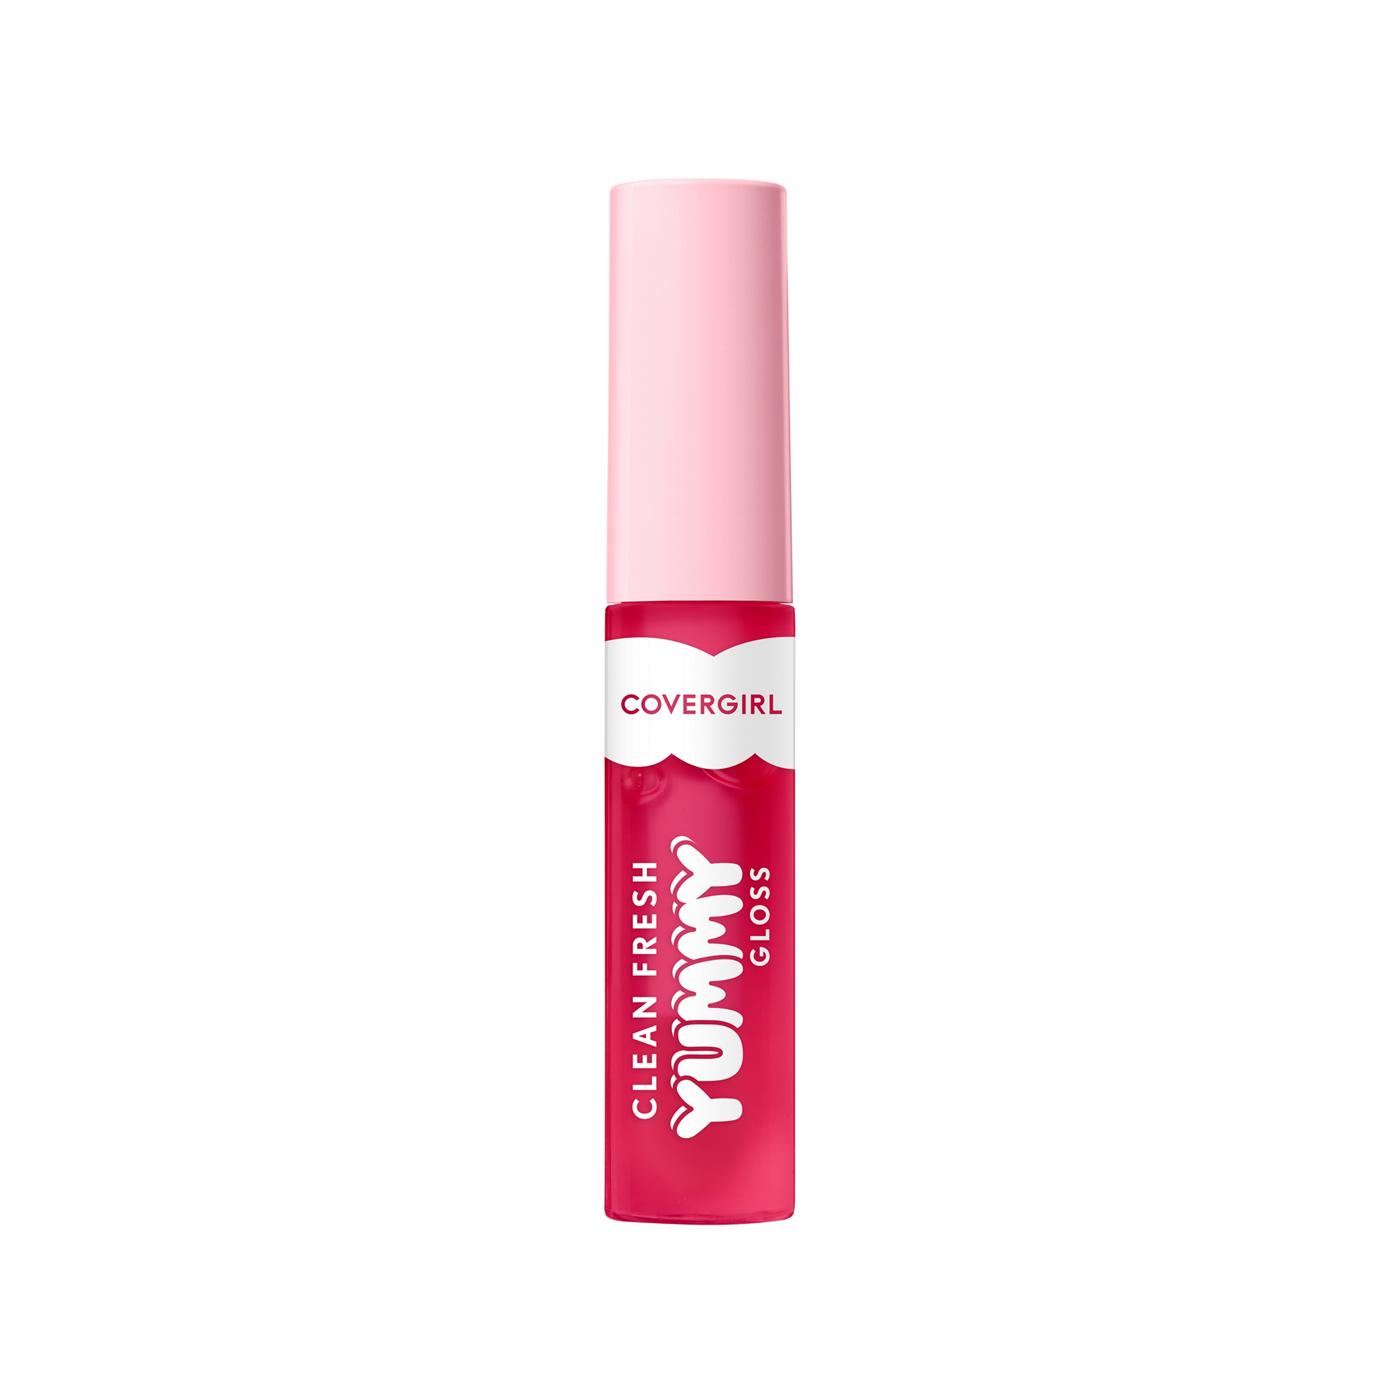 Covergirl Clean Fresh Yummy Lip Gloss - You're Just Jelly; image 10 of 10